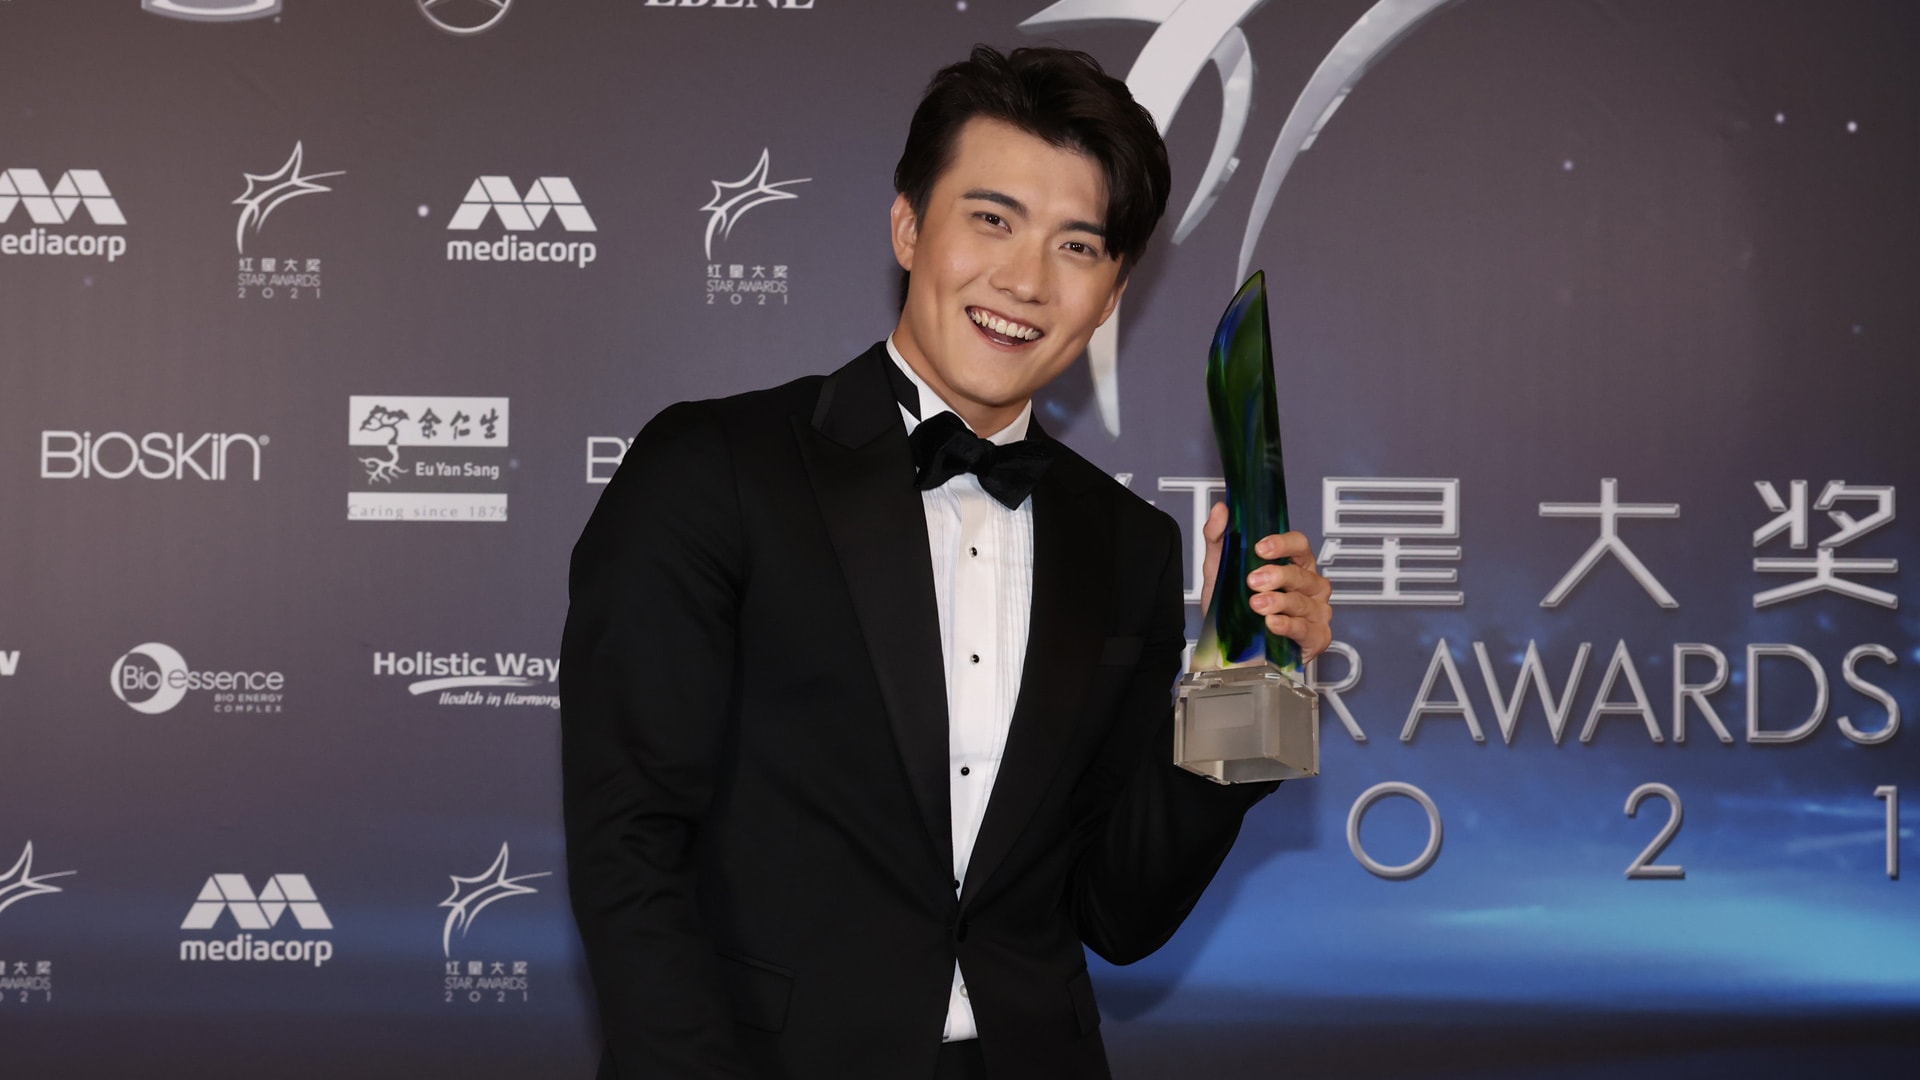 Zhang Zetong Says There’s More Pressure Than Honour Winning Star Awards Best Newcomer Award